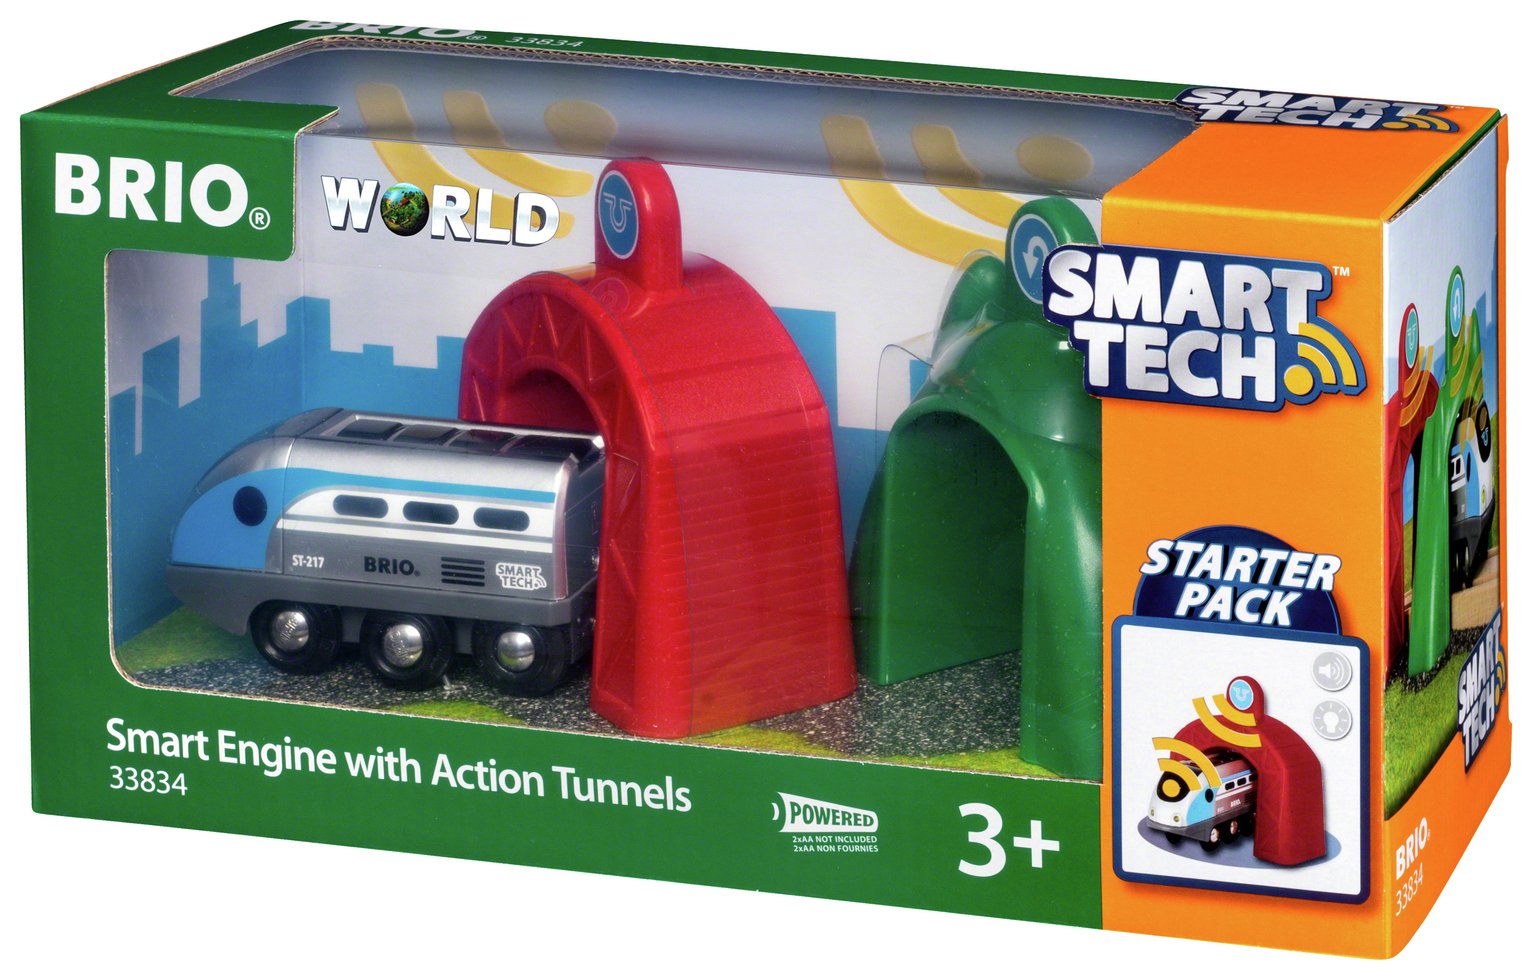 BRIO World Smart Tech Engine with Action Tunnels